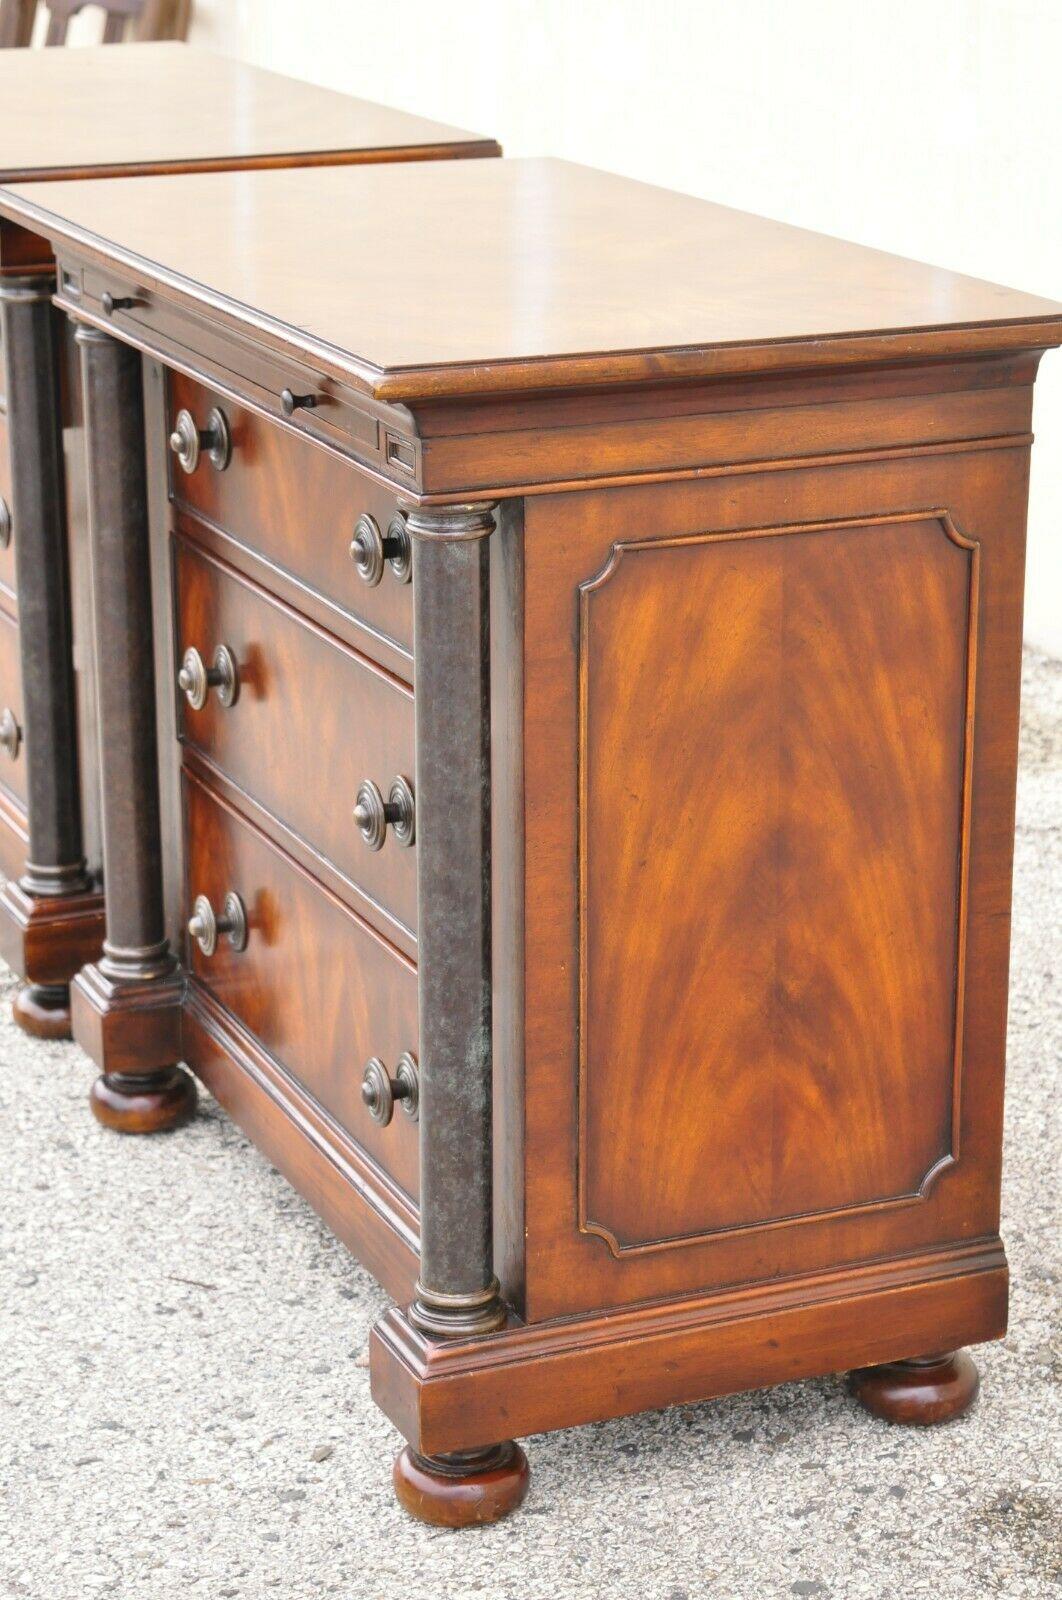 20th Century French Empire Style Column and Bun Feet 3 Drawers Nightstand Commode, a Pair